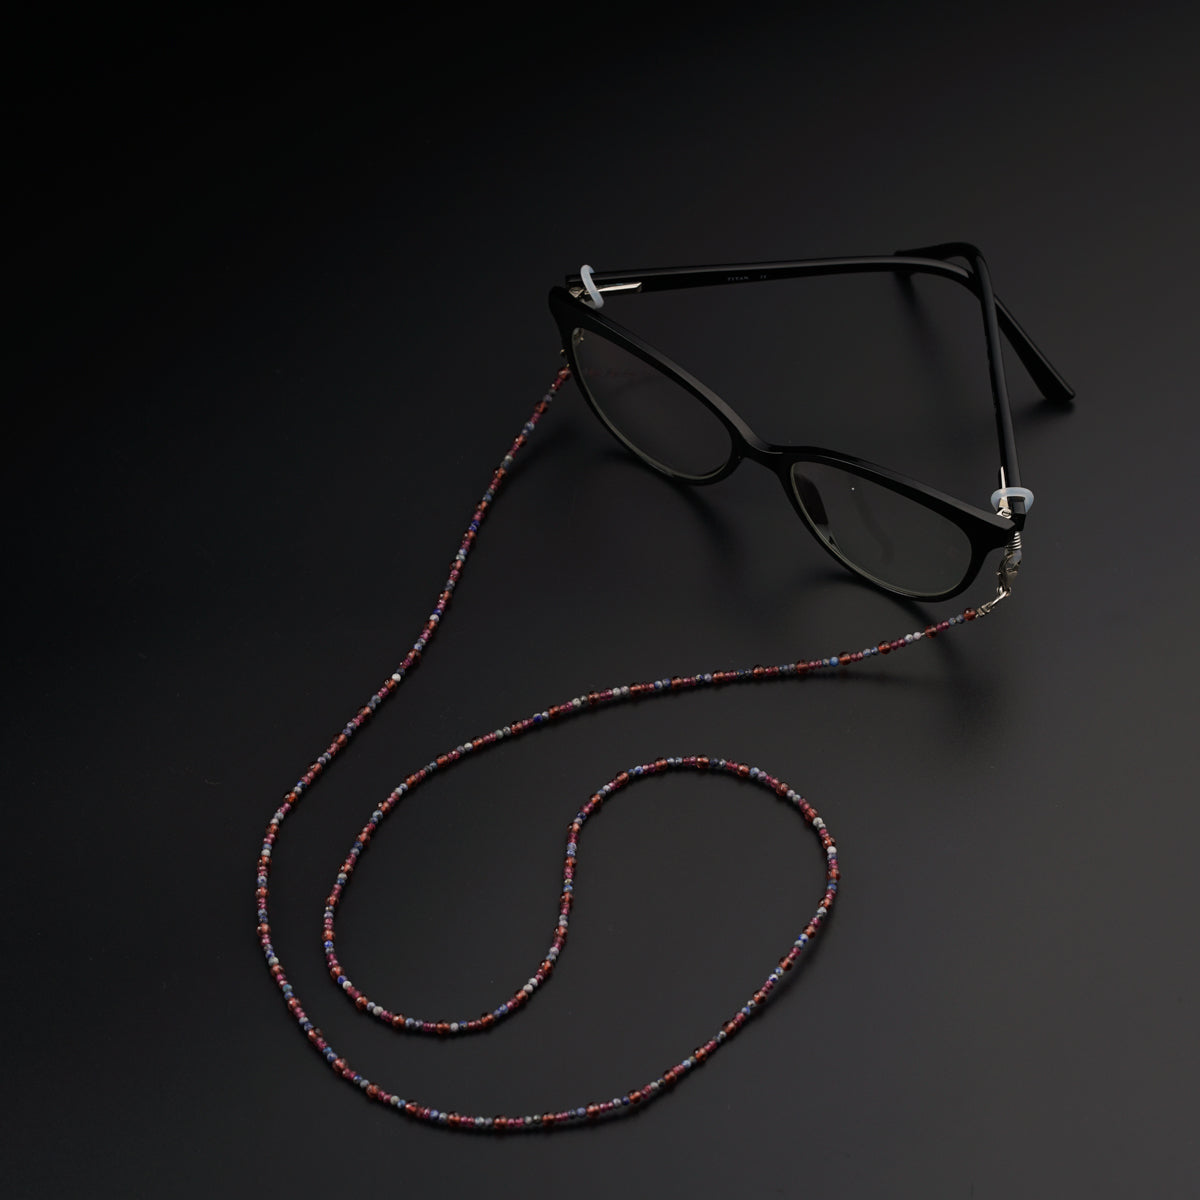 a pair of glasses sitting on top of a black surface